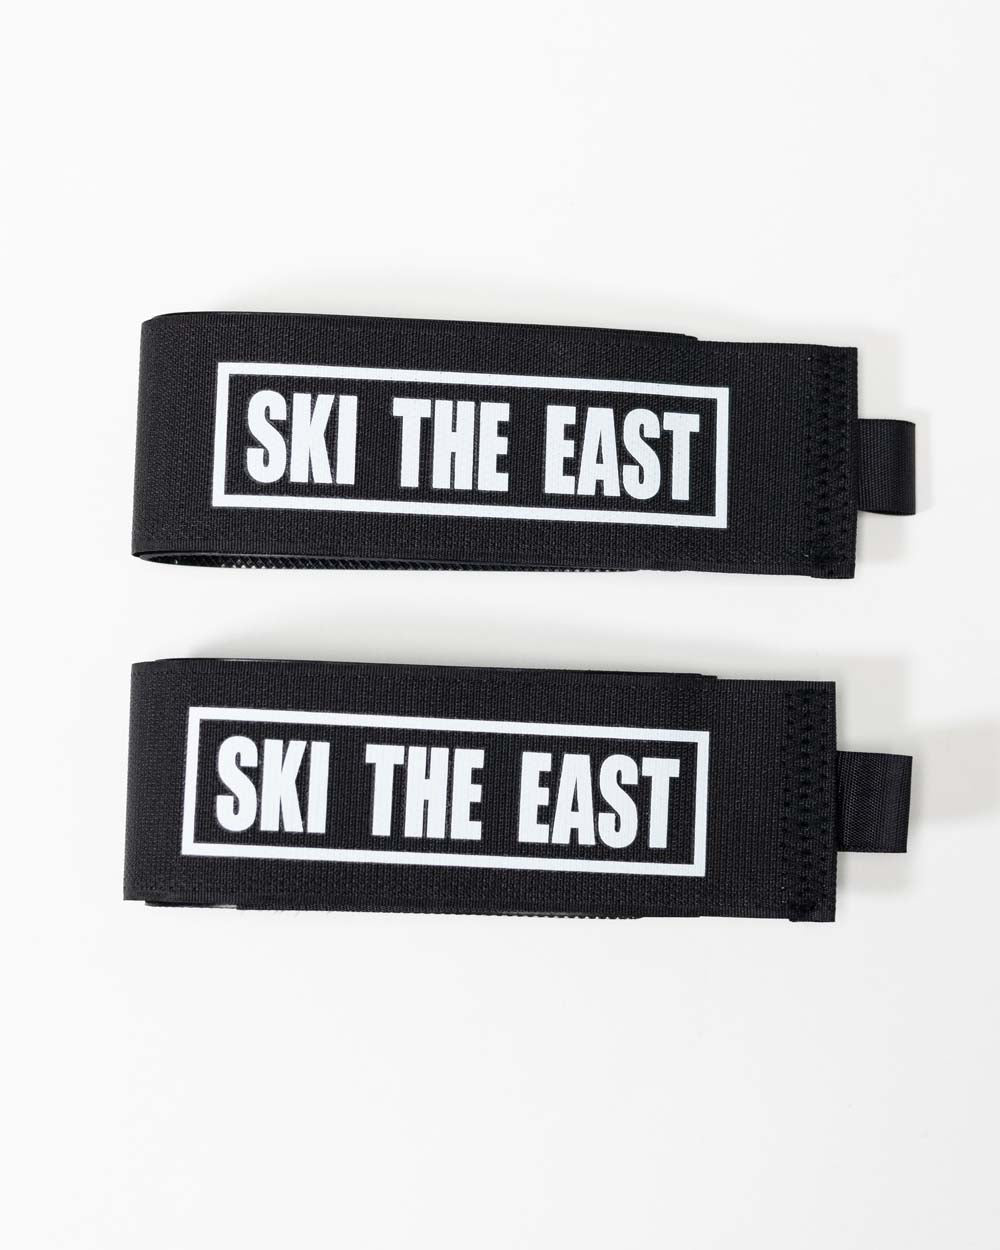 Ski Straps - Extra Strong And Wide - Fast Free Delivery